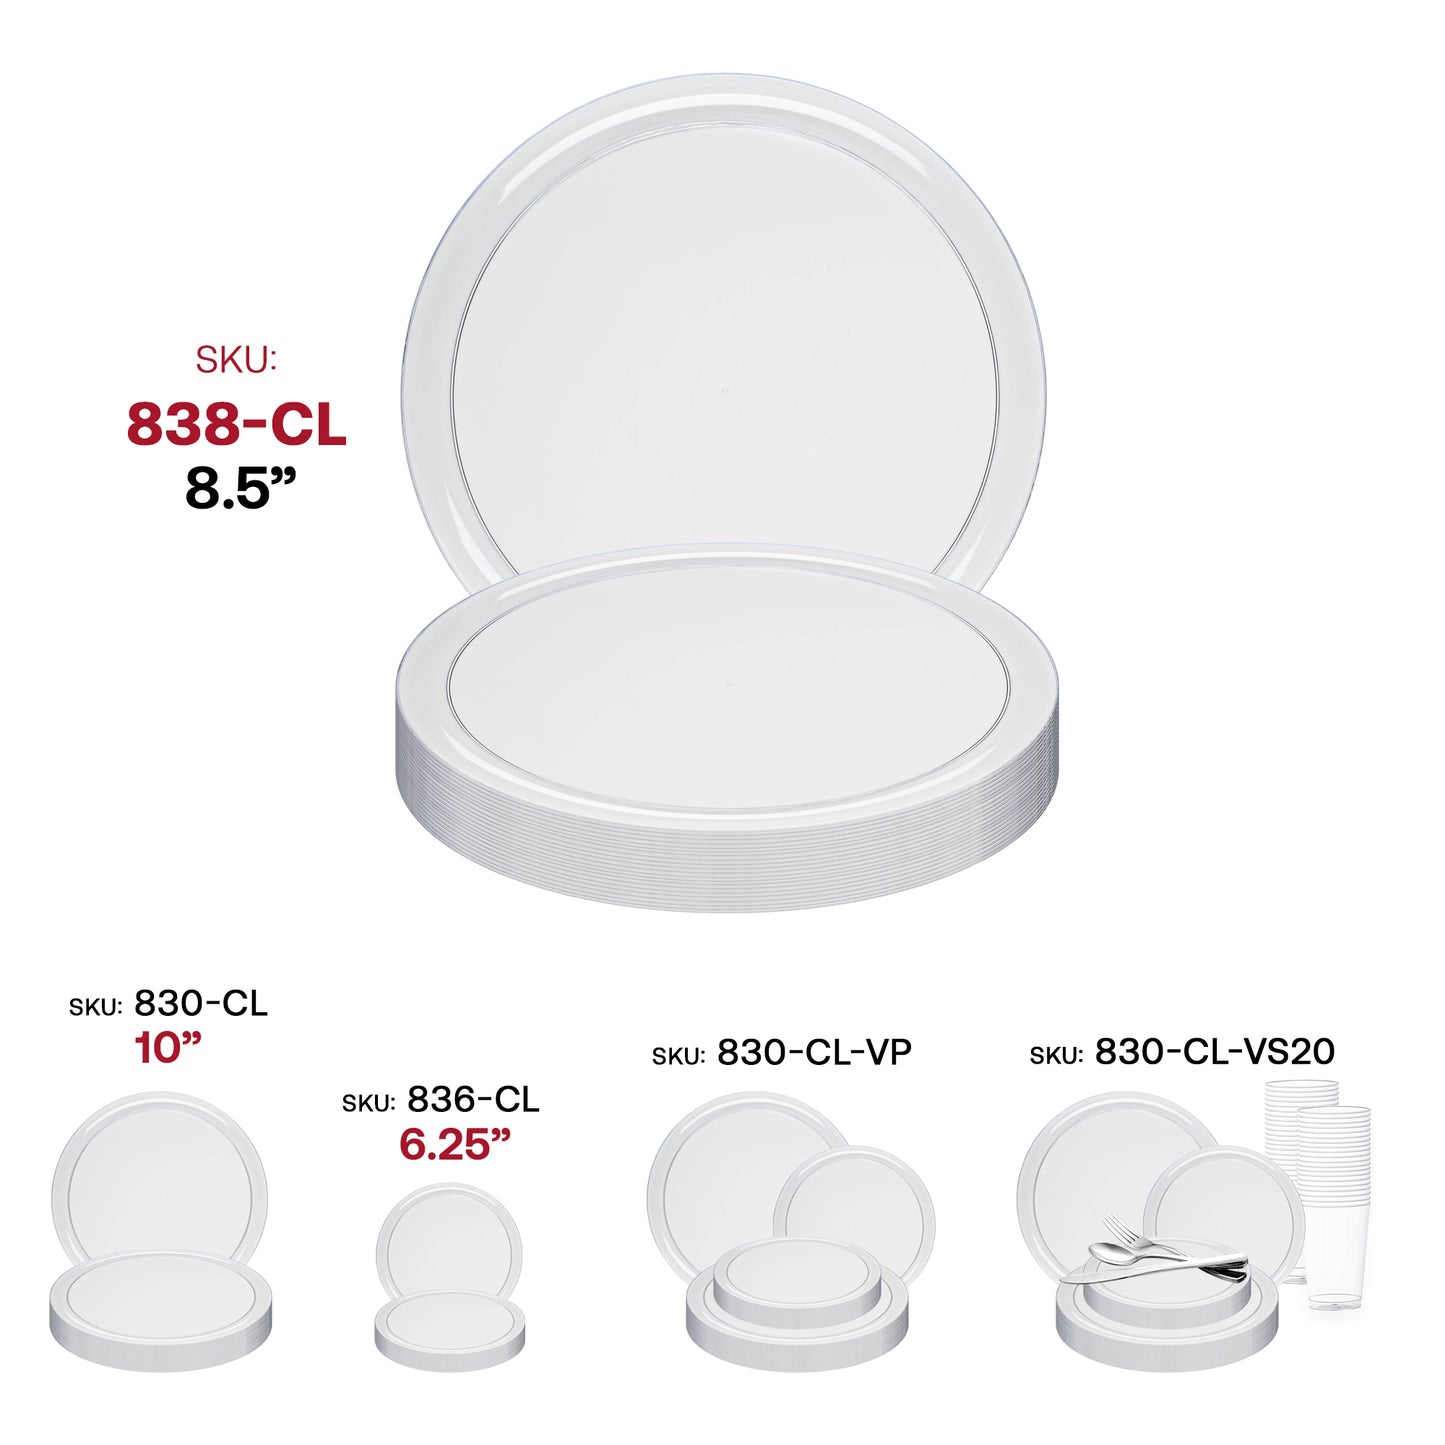 Clear Flat Round Disposable Plastic Appetizer/Salad Plates (8.5") SKU | The Kaya Collection